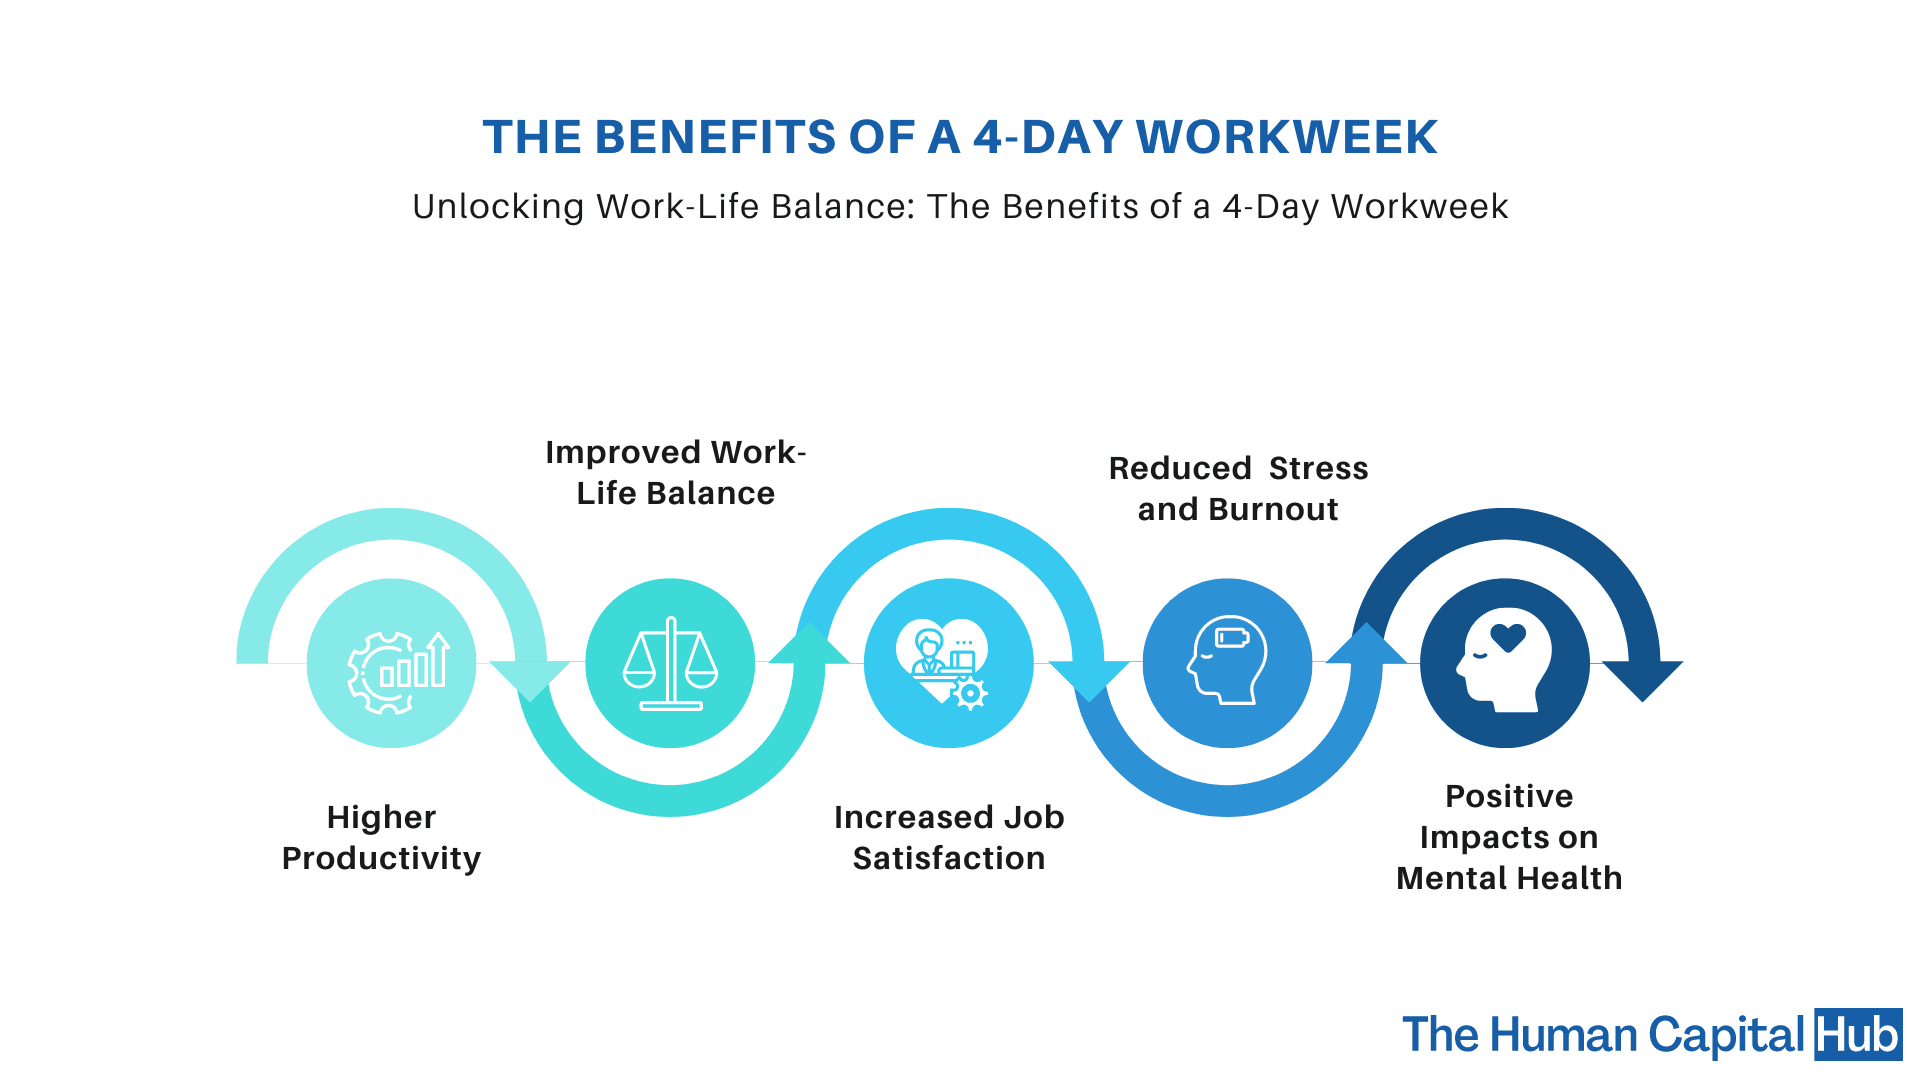 4 day work week: What we know already from scientific research